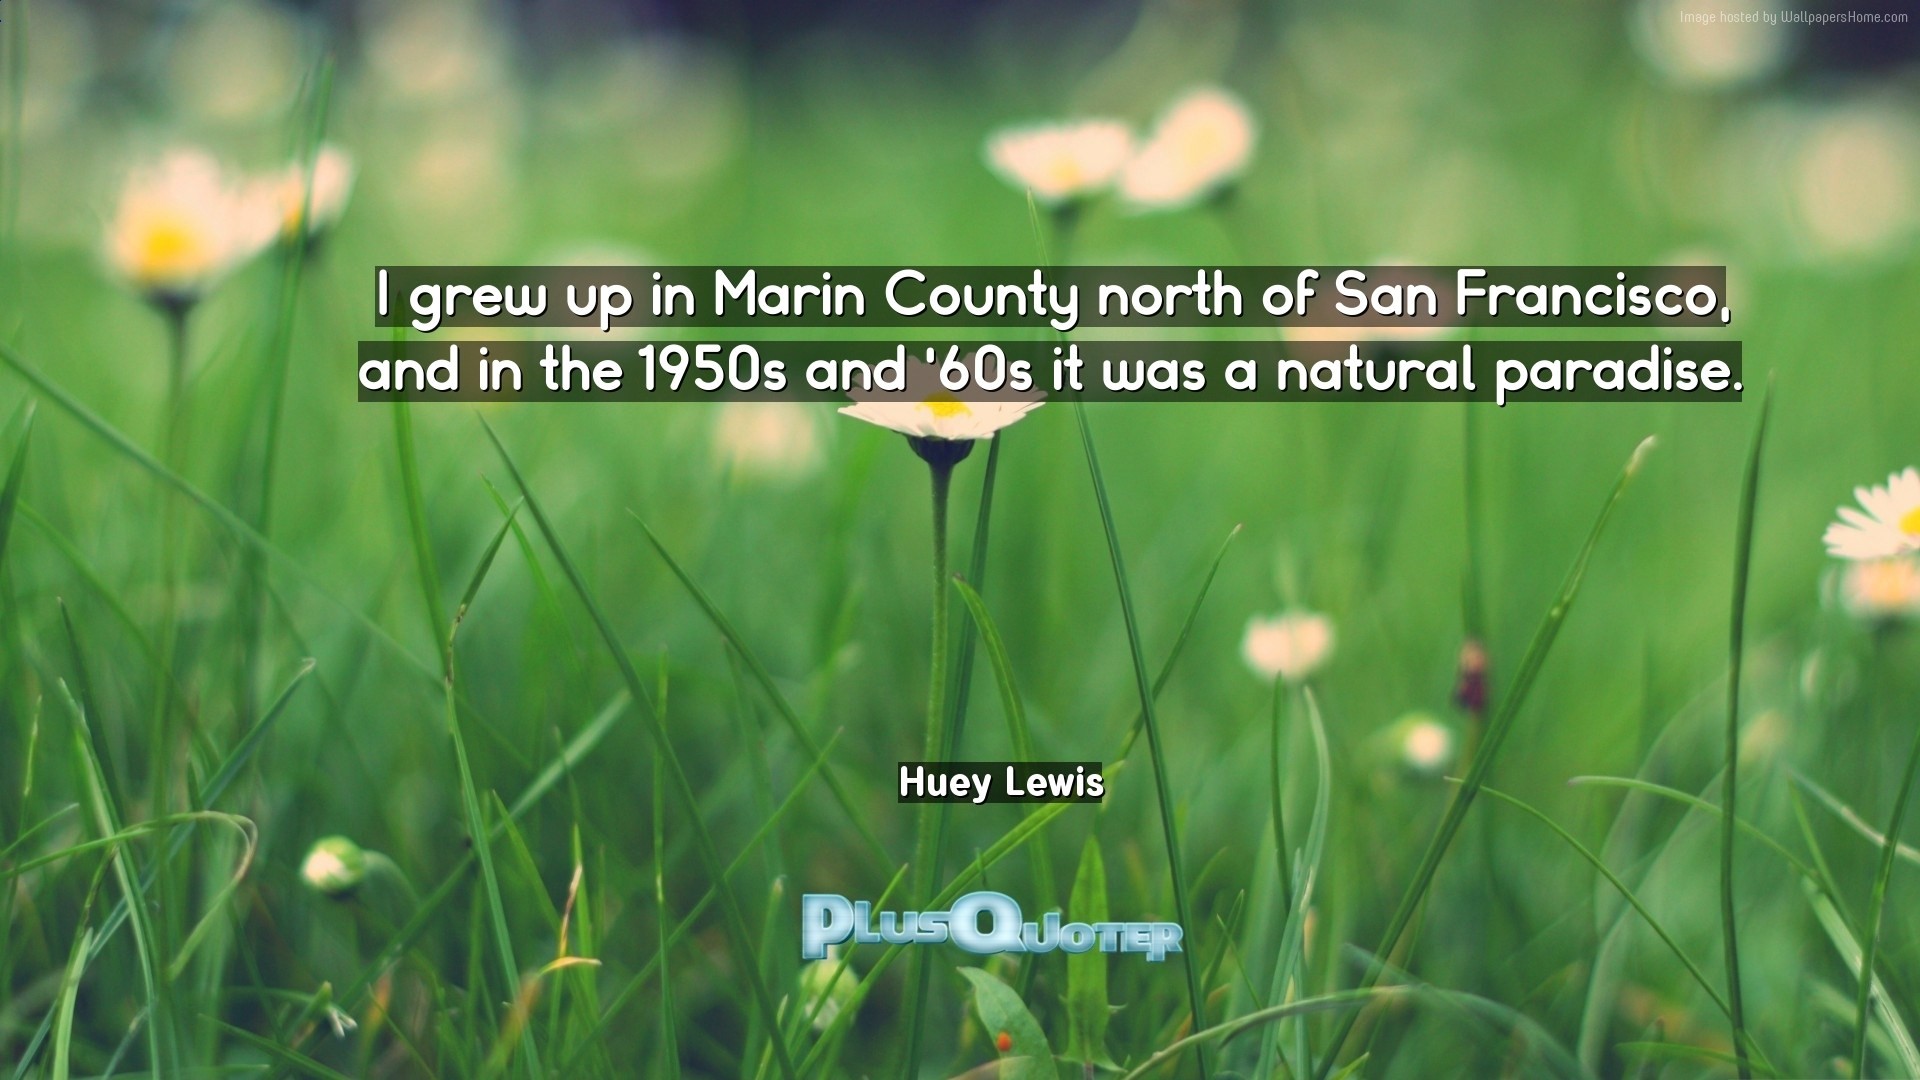 1920x1080 Download Wallpaper with inspirational Quotes- "I grew up in Marin County  north of San. “